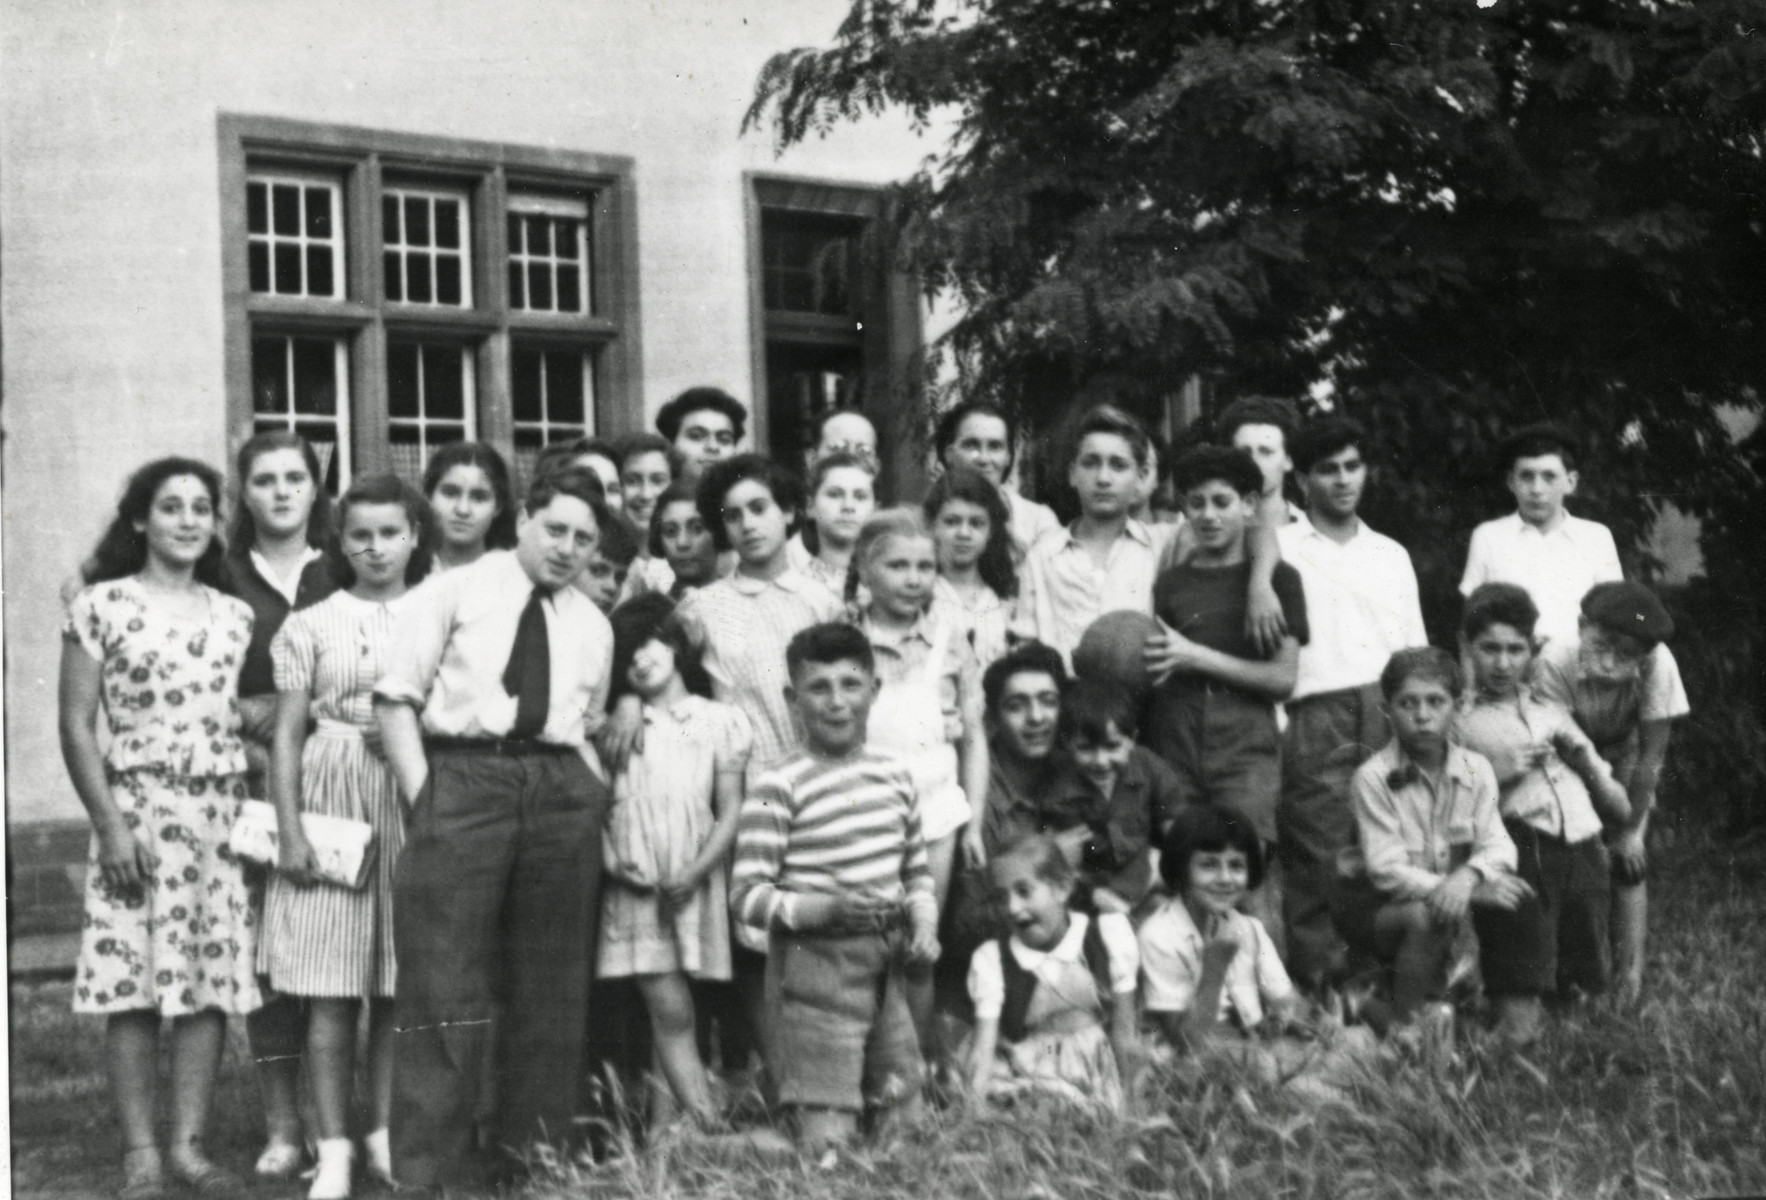 Group portrait of "Les Cigognes" (the storks), children in the Haguenau children's home.

Pictured in back are the directors, Vivette and Julien Samuel.